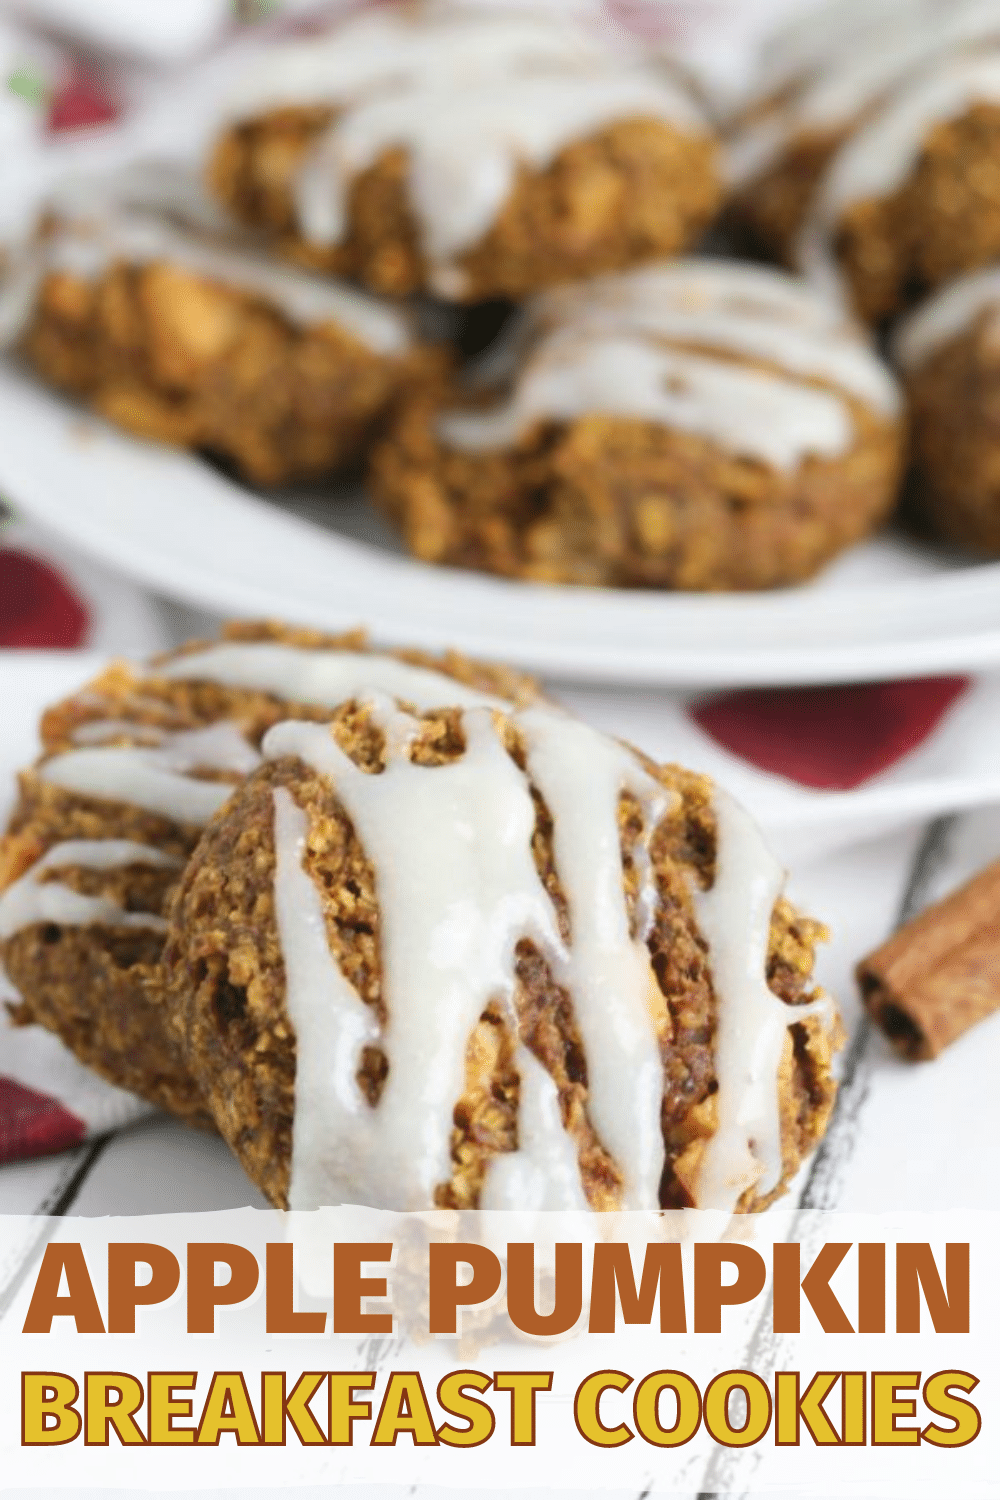 Apple Pumpkin Breakfast Cookies are packed full of flavor and nutrition. These are a great way to start your day and they smell amazing too! #breakfast #breakfastcookies #apples via @wondermomwannab